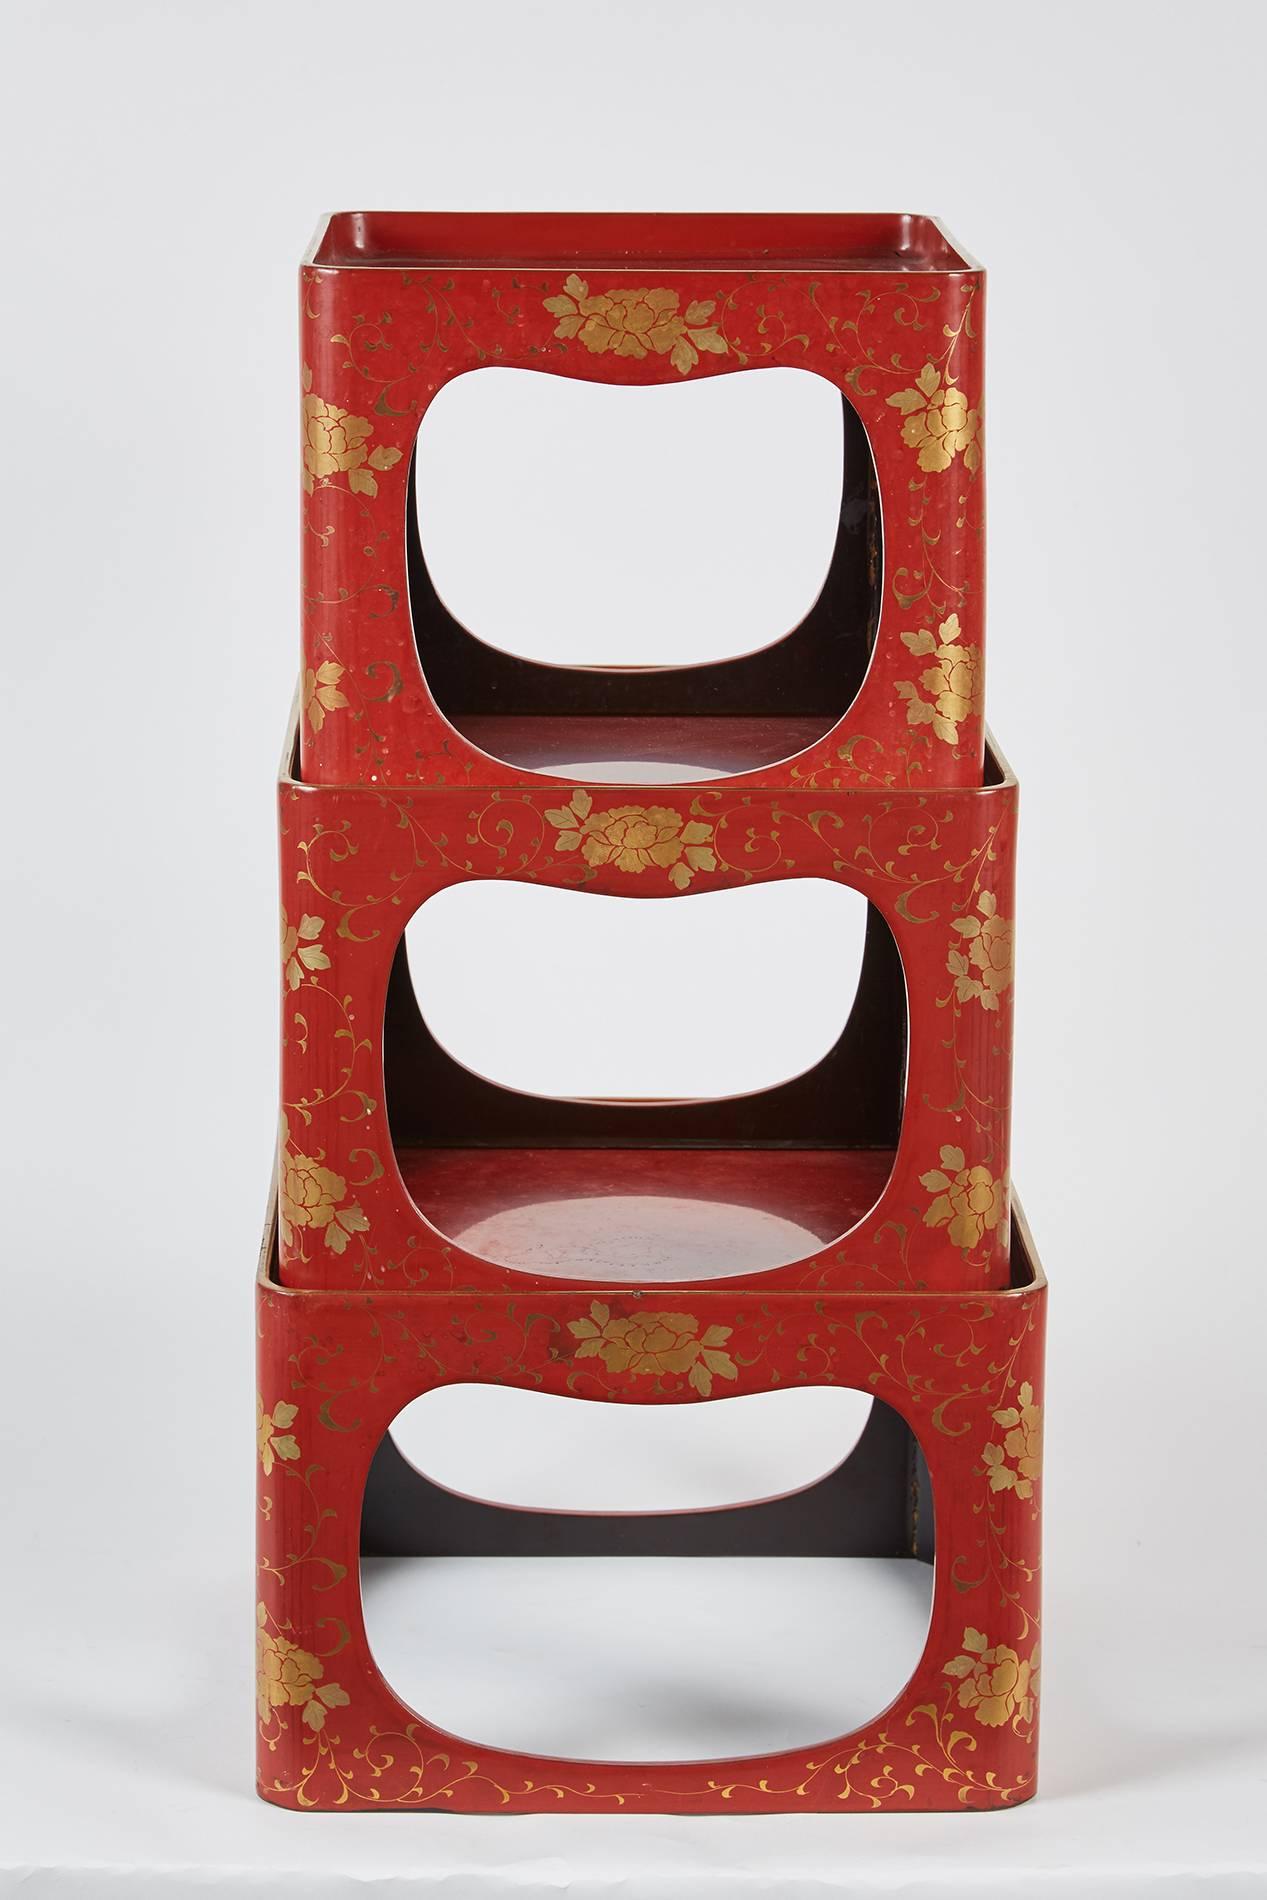 A lovely set of lightweight Japanese lacquer stack trays that feature painted vines and flowers throughout.